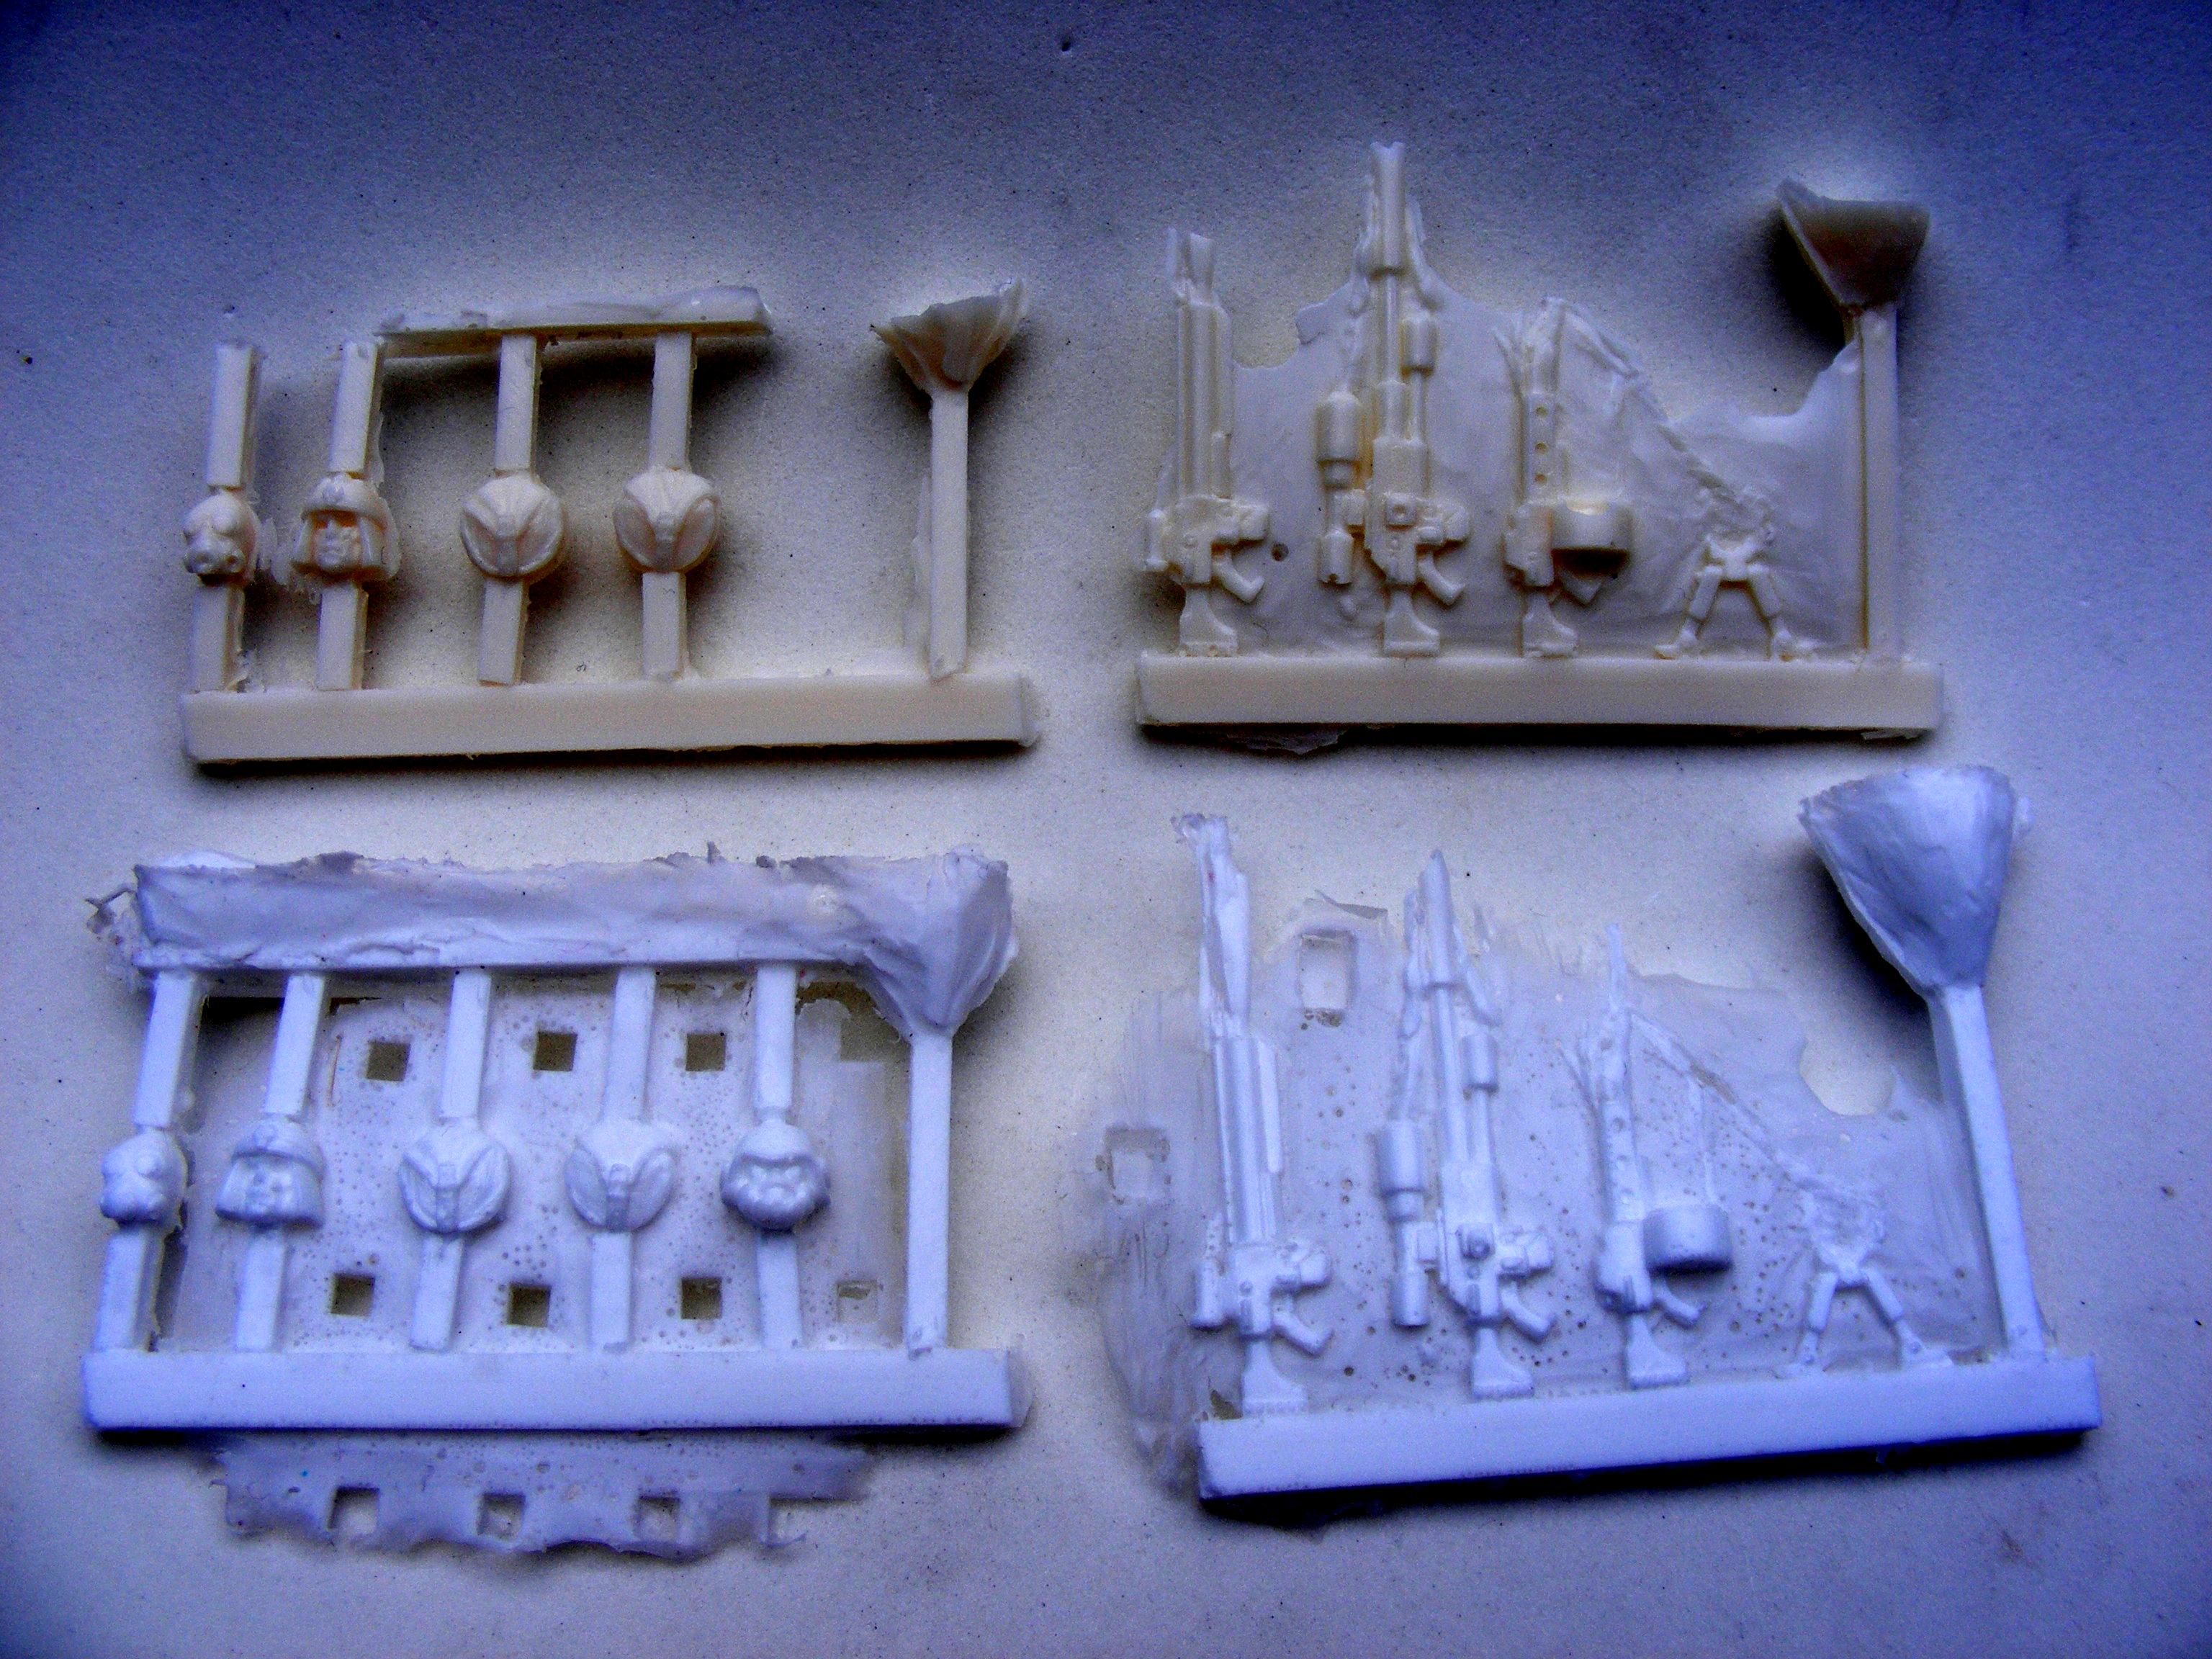 horrid image of casts with 2 types of resin